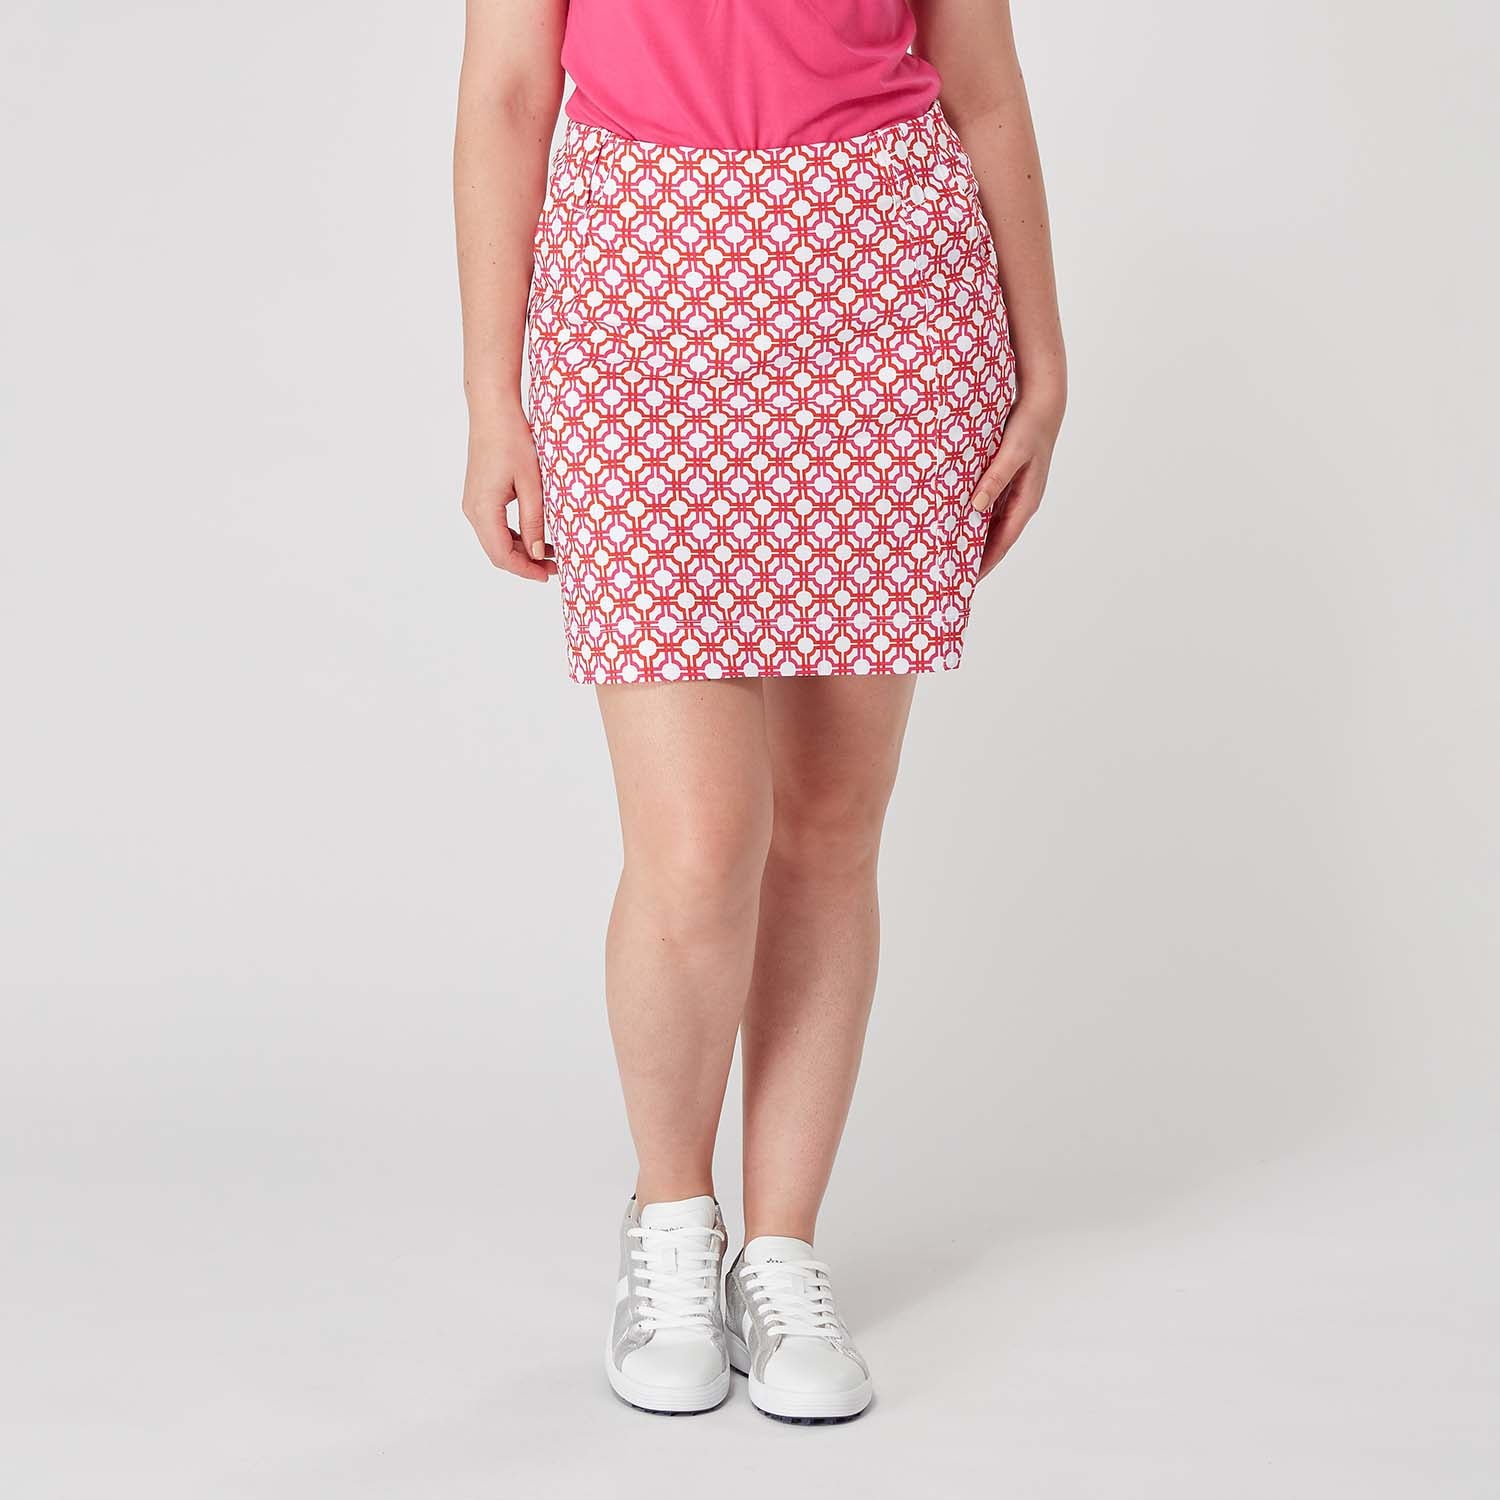 Swing Out Sister Women's Pull-On Skort in Lush Pink and Mandarin Mosaic Pattern 